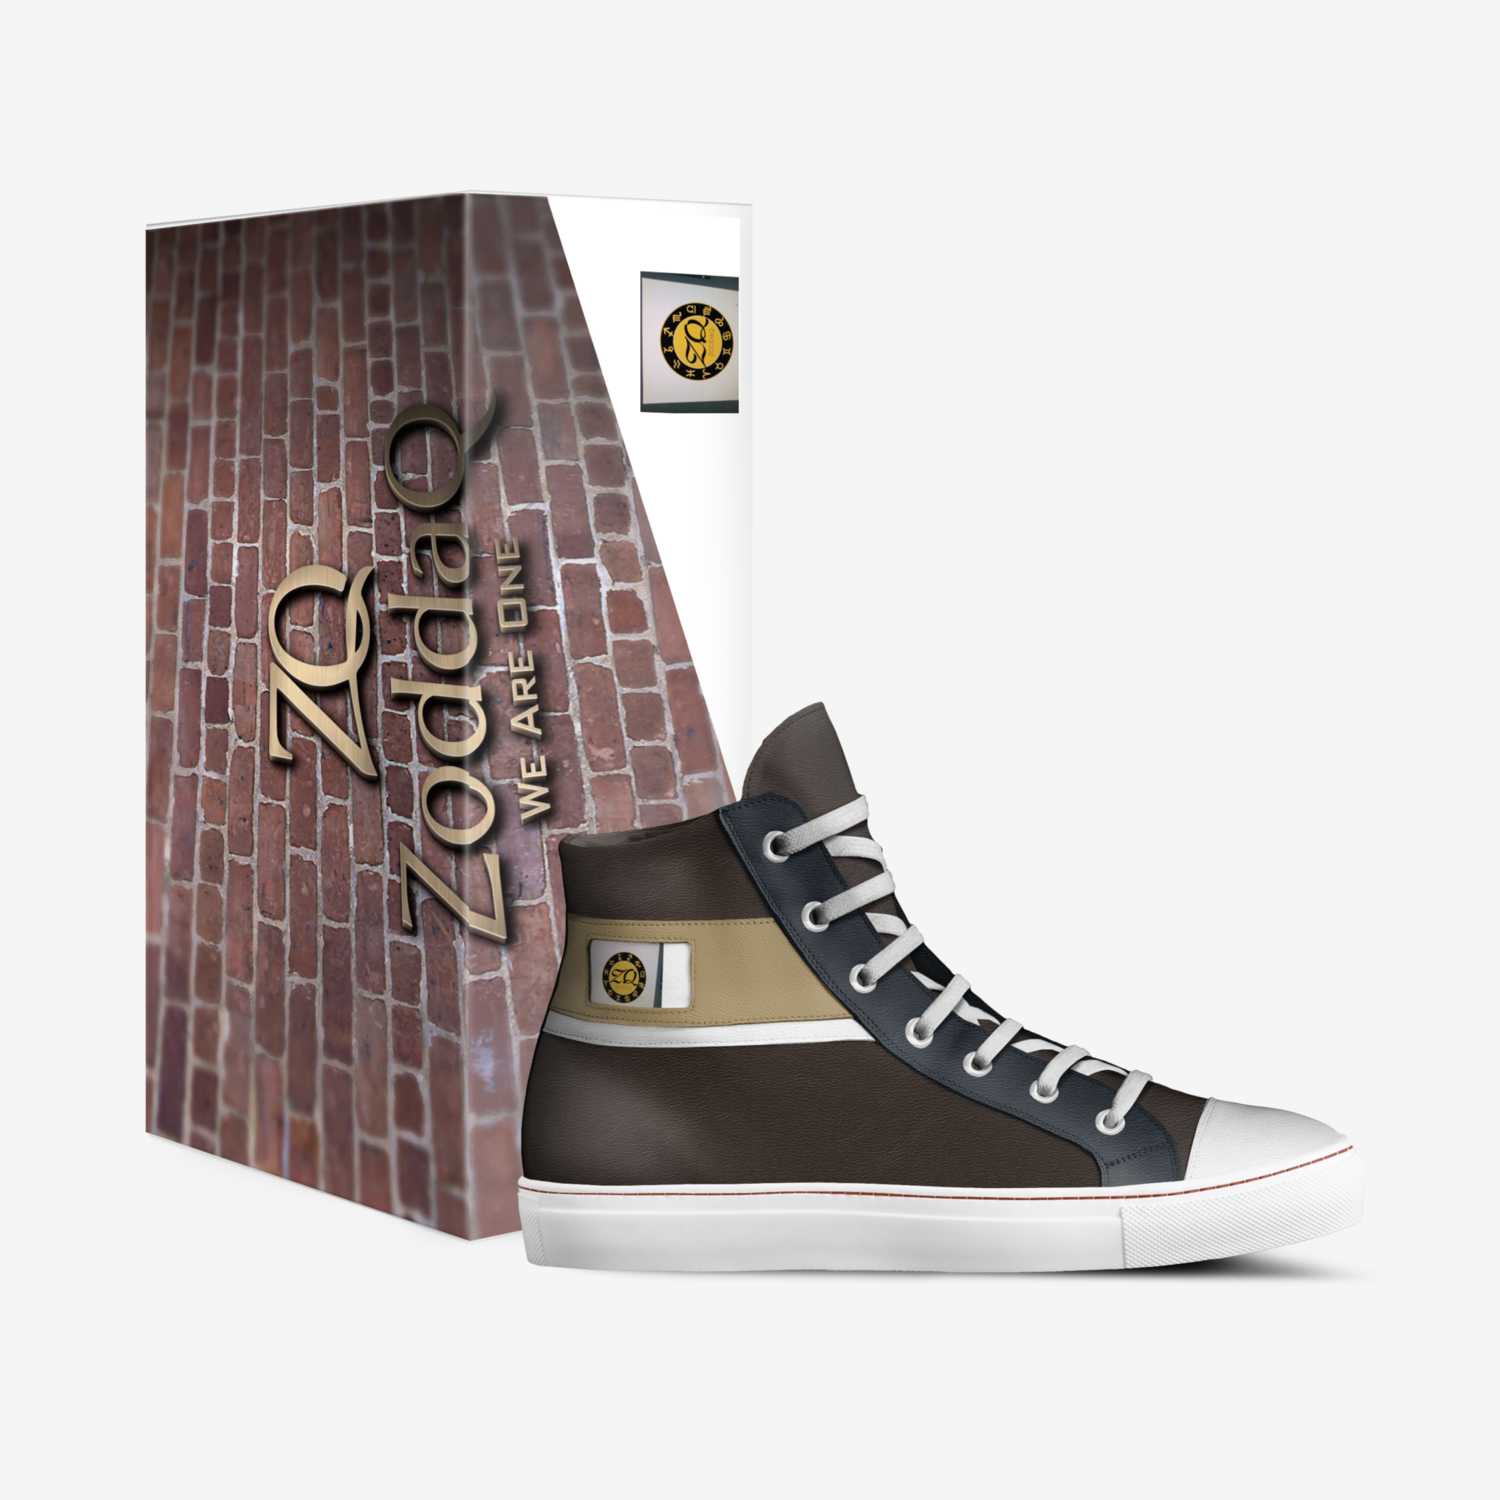 Zoddaq custom made in Italy shoes by Beau Joli Andrews | Box view